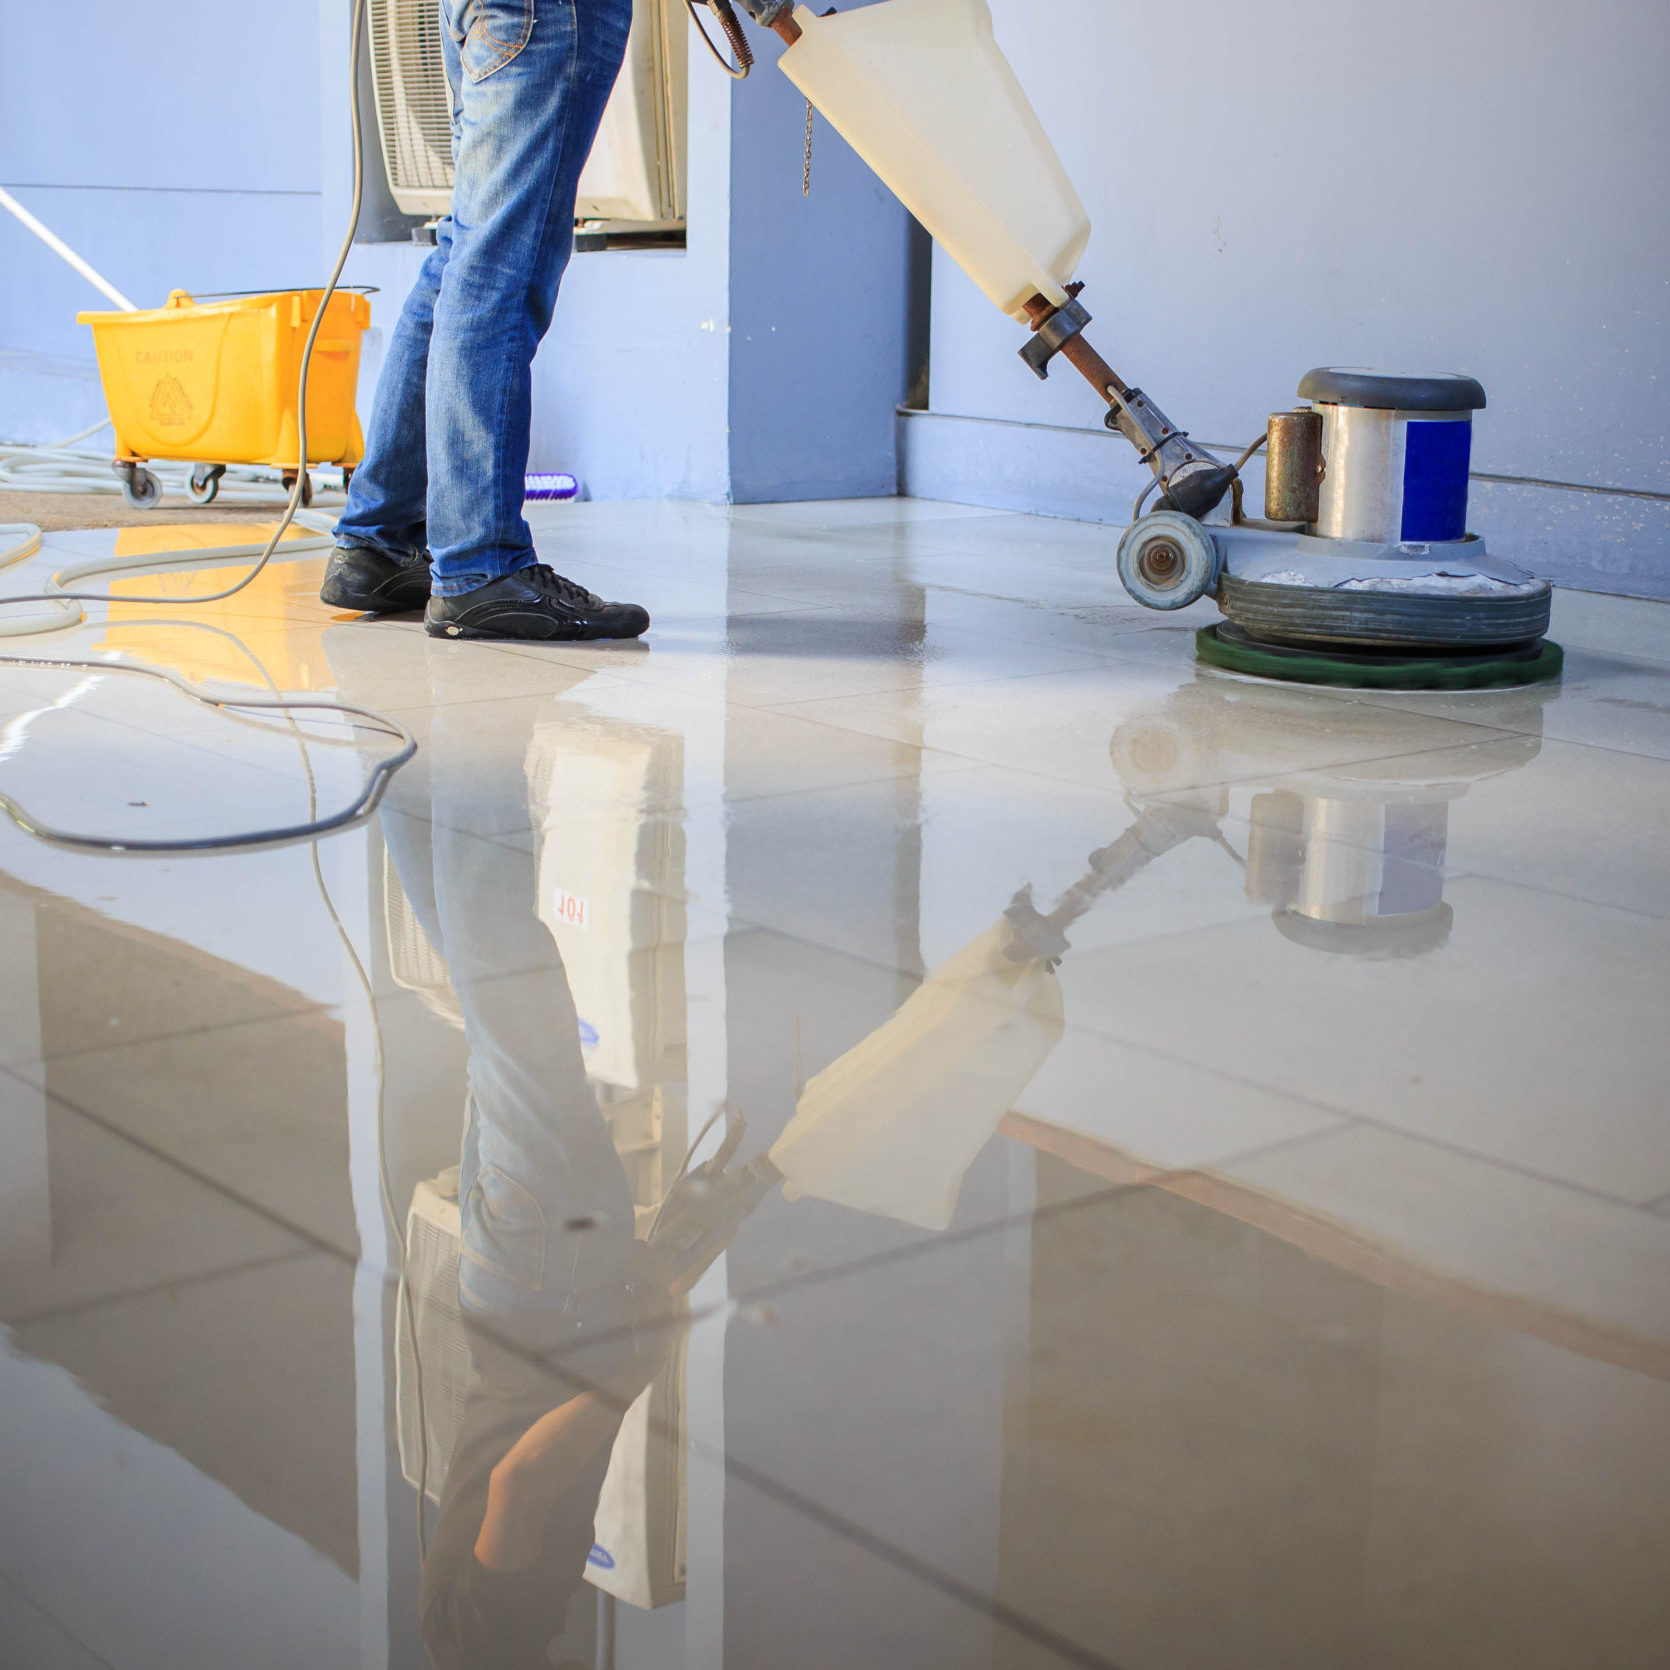 Tile & Grout Cleaning - Countertops & Floors - Carpet Care Plus - Ohio